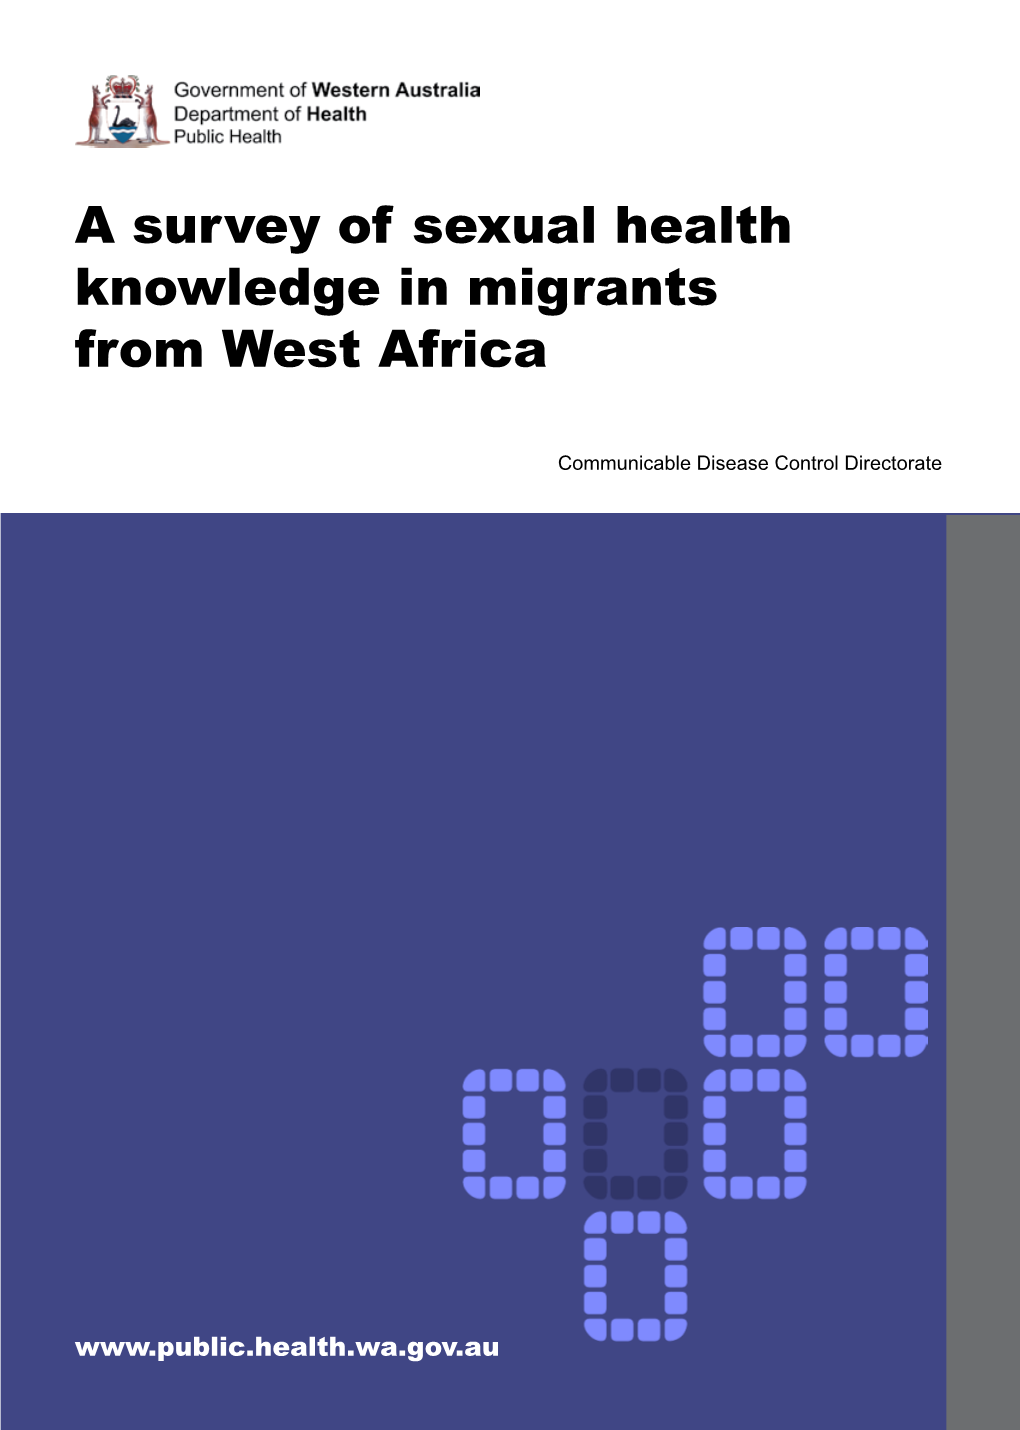 A Survey of Sexual Health Knowledge in Migrants from West Africa